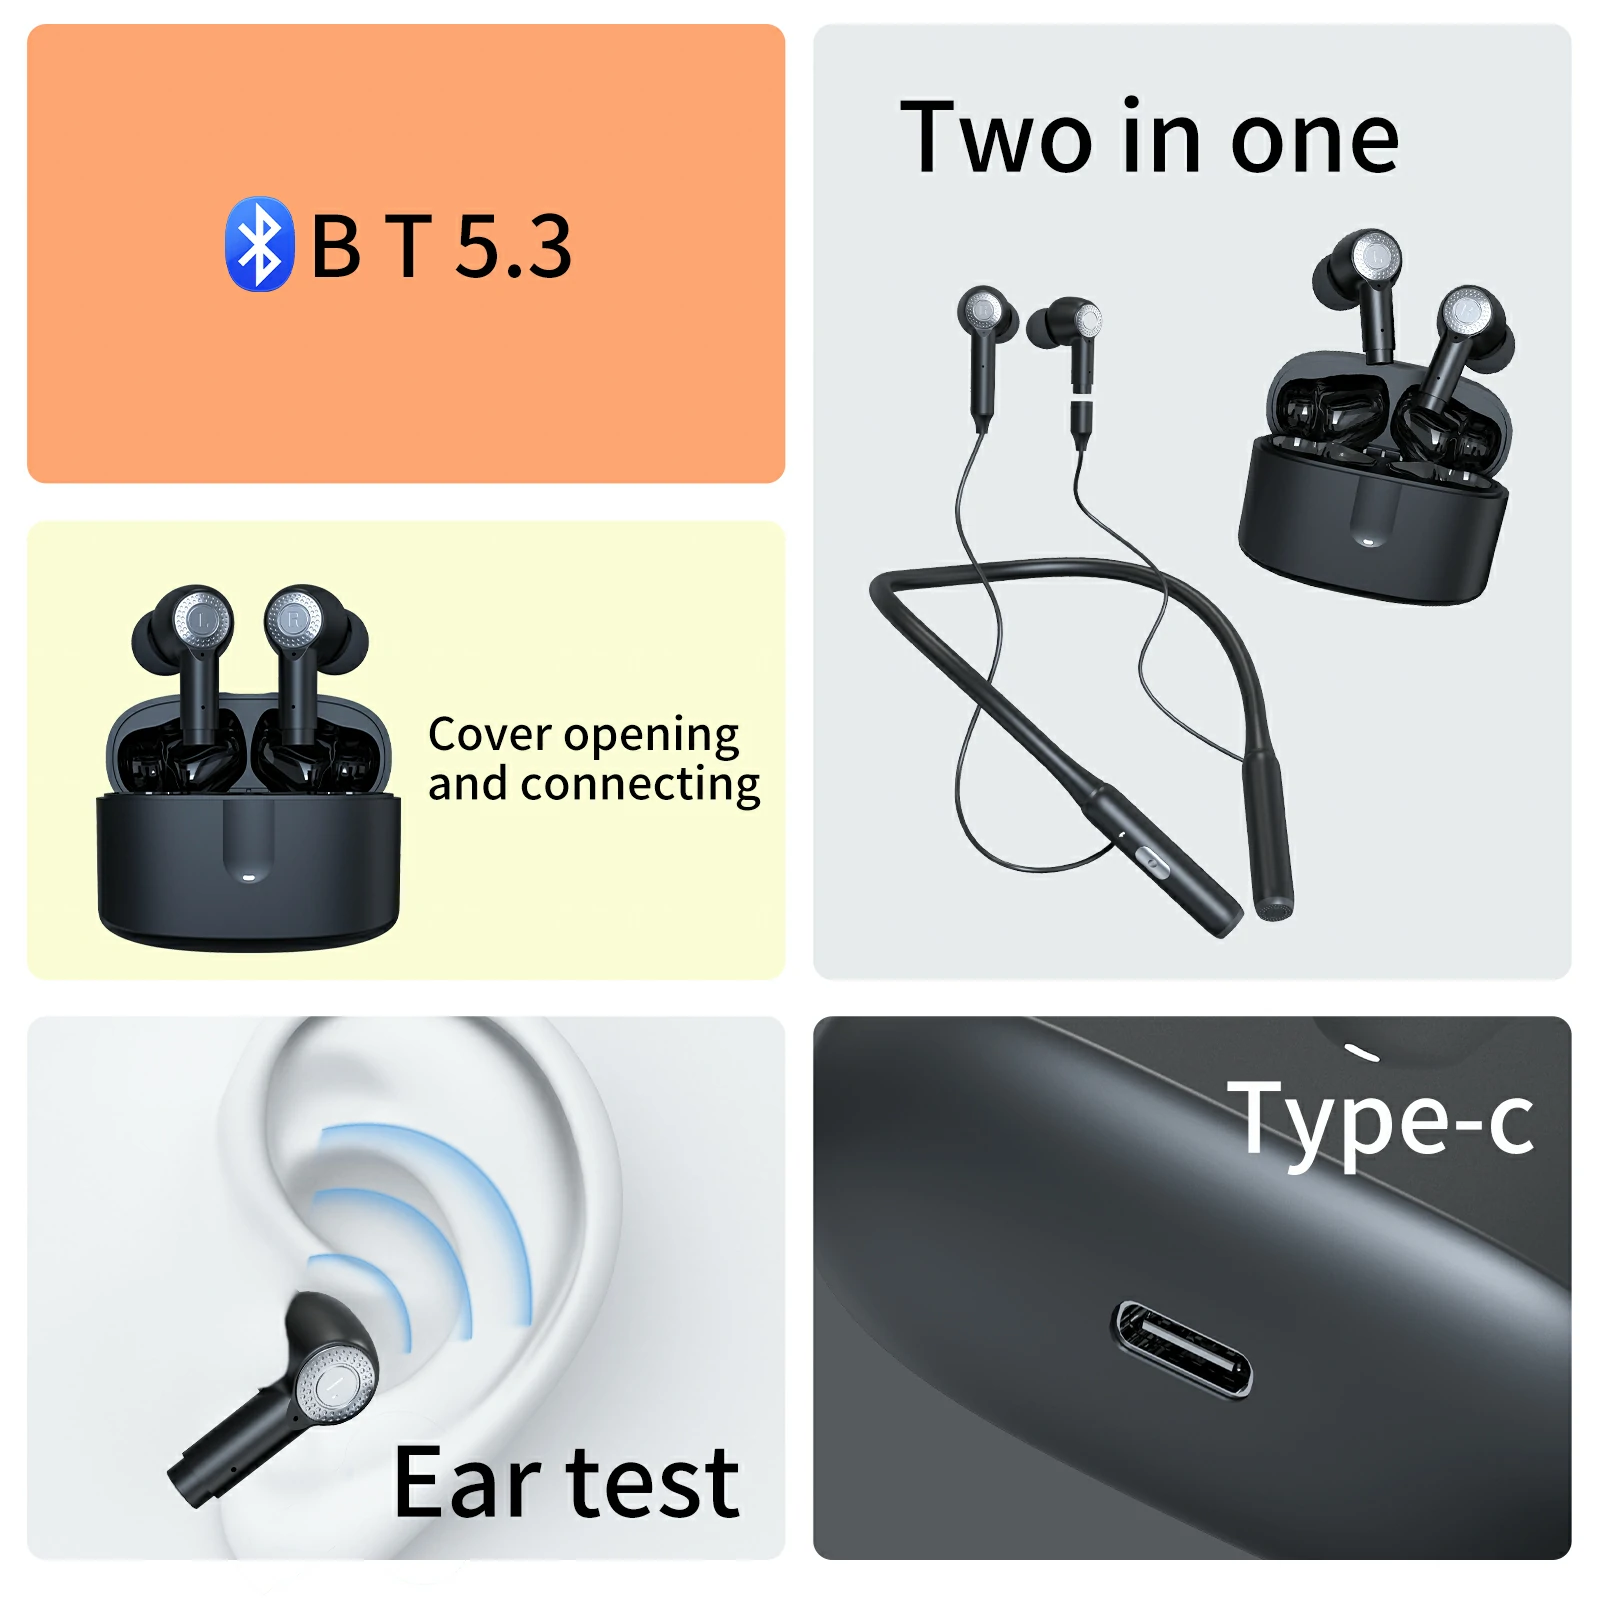 WOWTECHPROMOS: Premium Wireless Earbuds with 4-Mic Clarity & IPX7 Protection